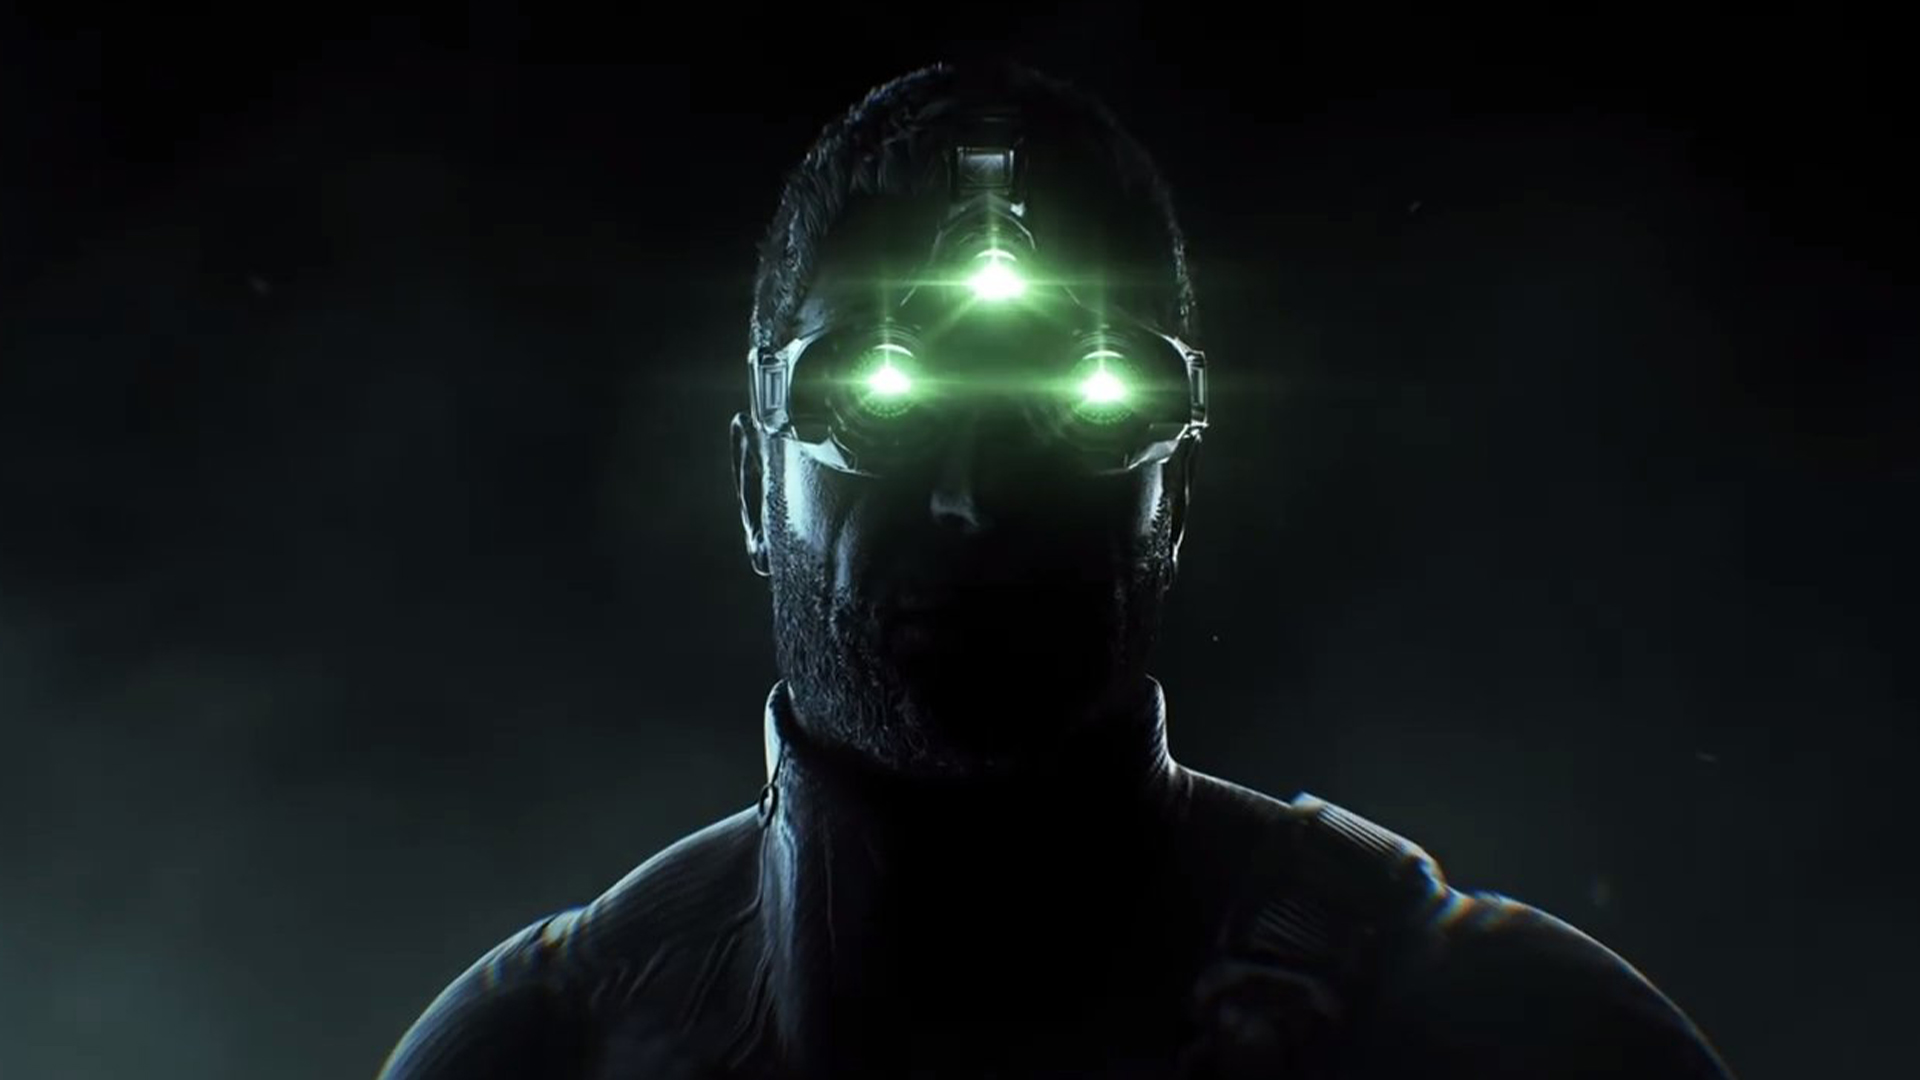 A new Splinter Cell game has reportedly been greenlit